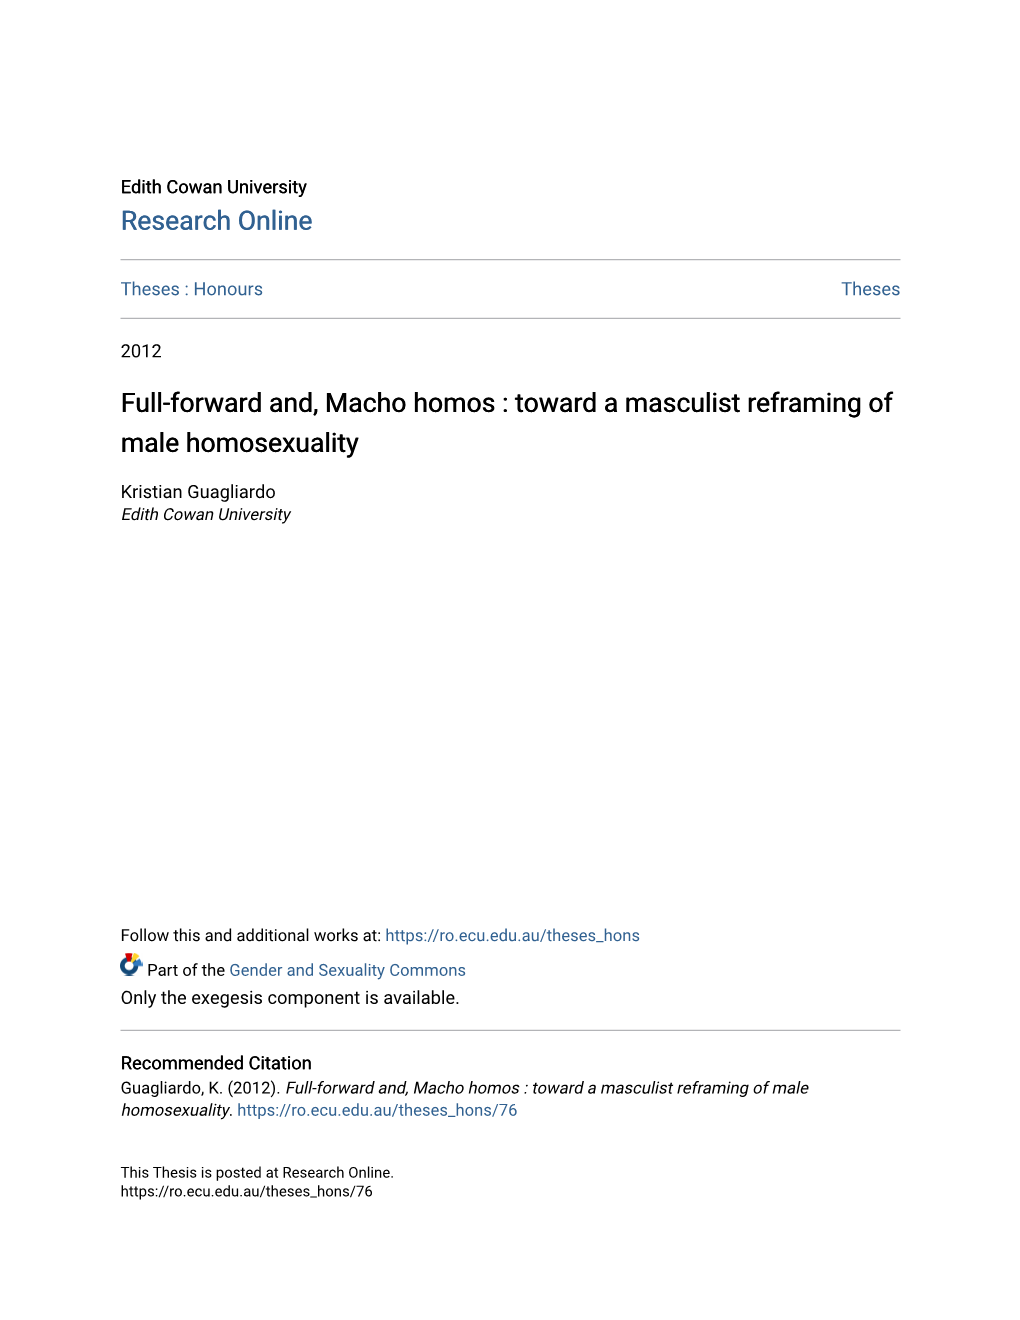 Full-Forward And, Macho Homos : Toward a Masculist Reframing of Male Homosexuality